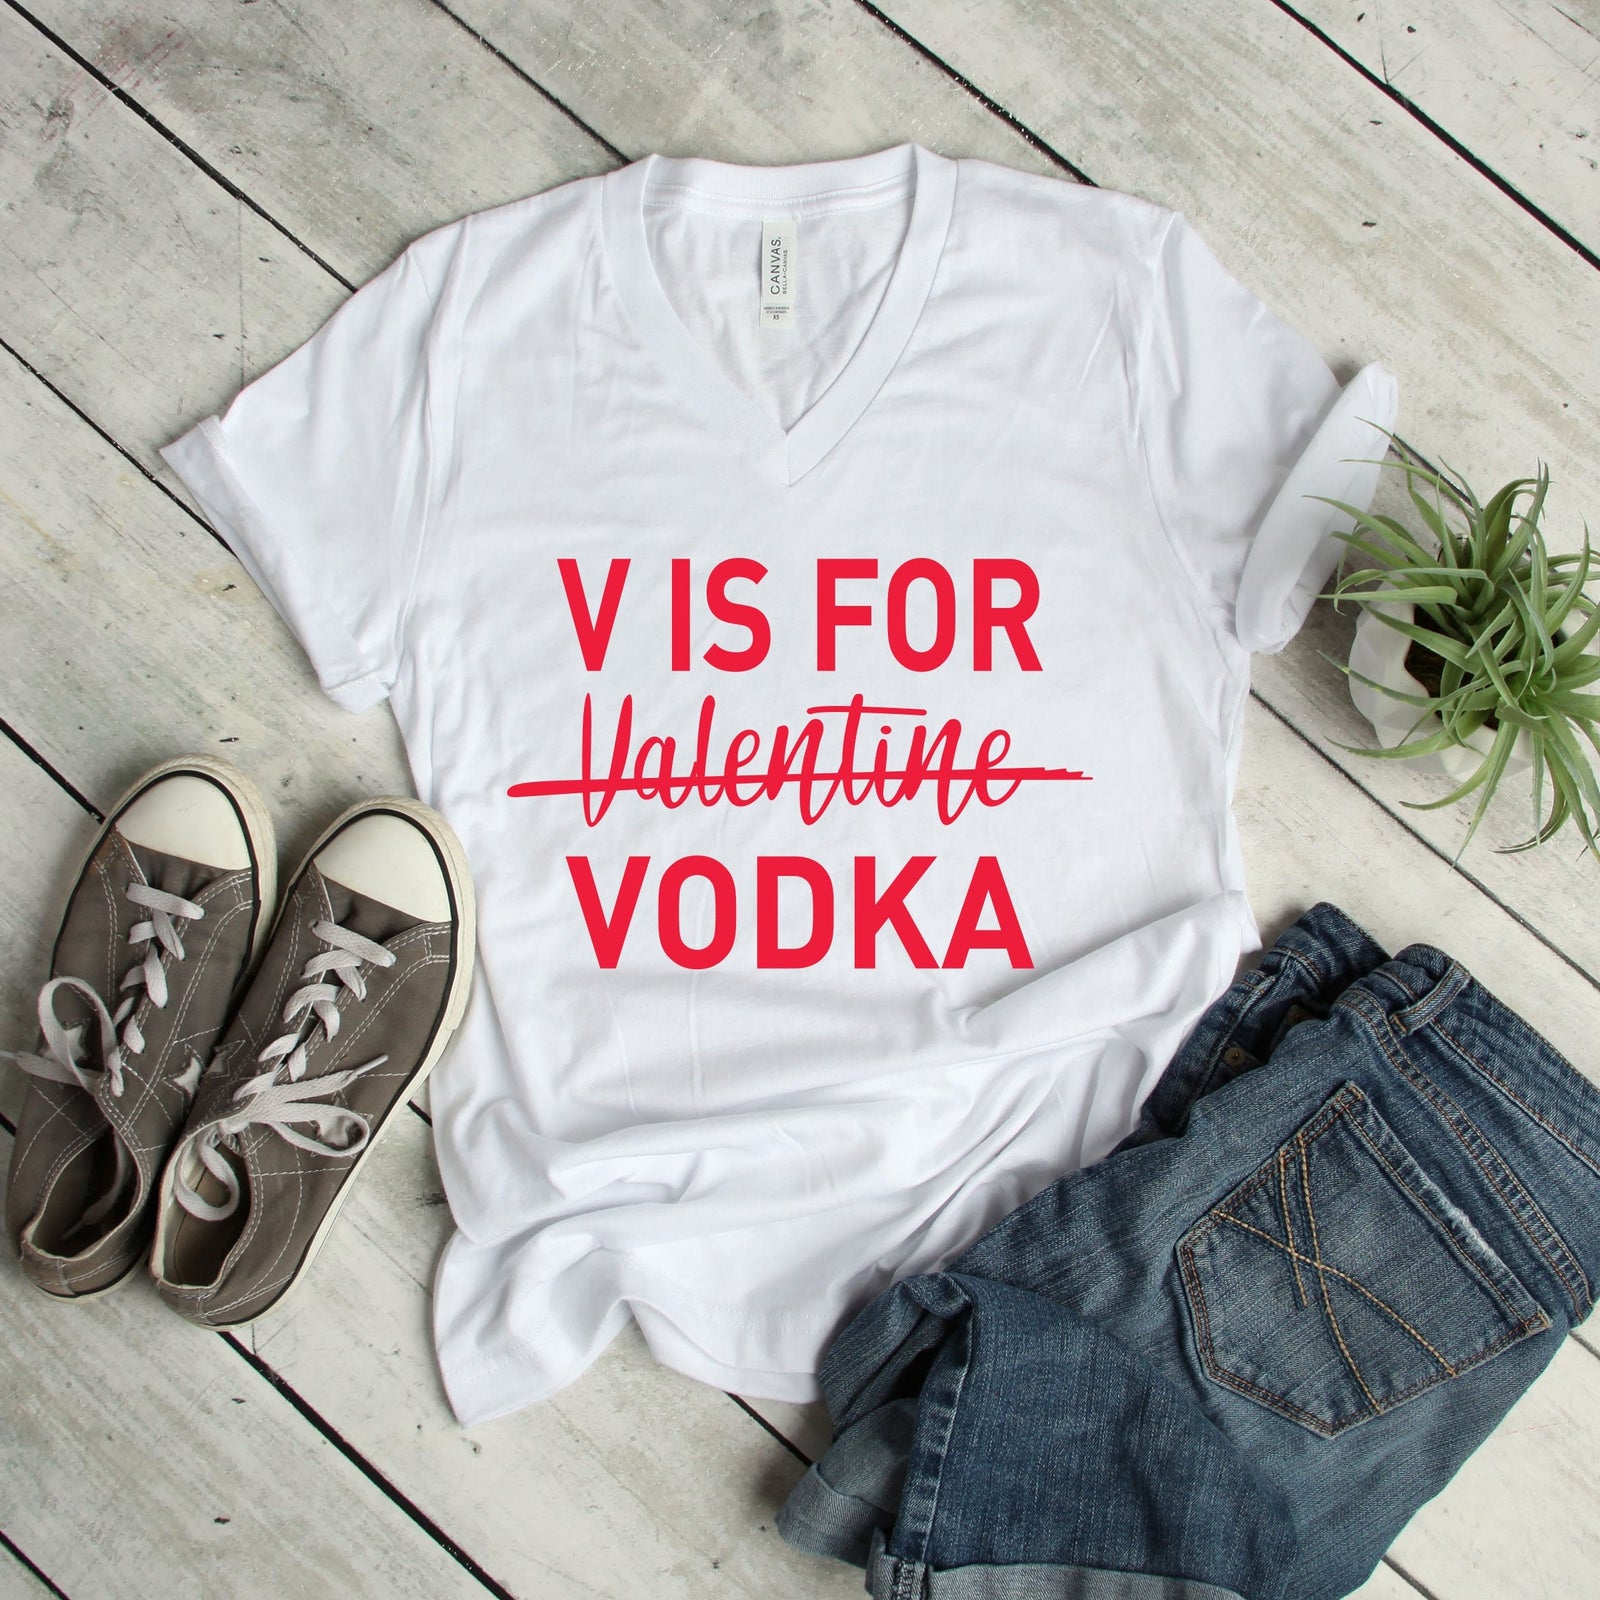 V is for Vodka - Funny Valentine Shirt - Cute Valentine Shirt - Unisex Adult Valentine's Day Shirt - Valentines Day Gift